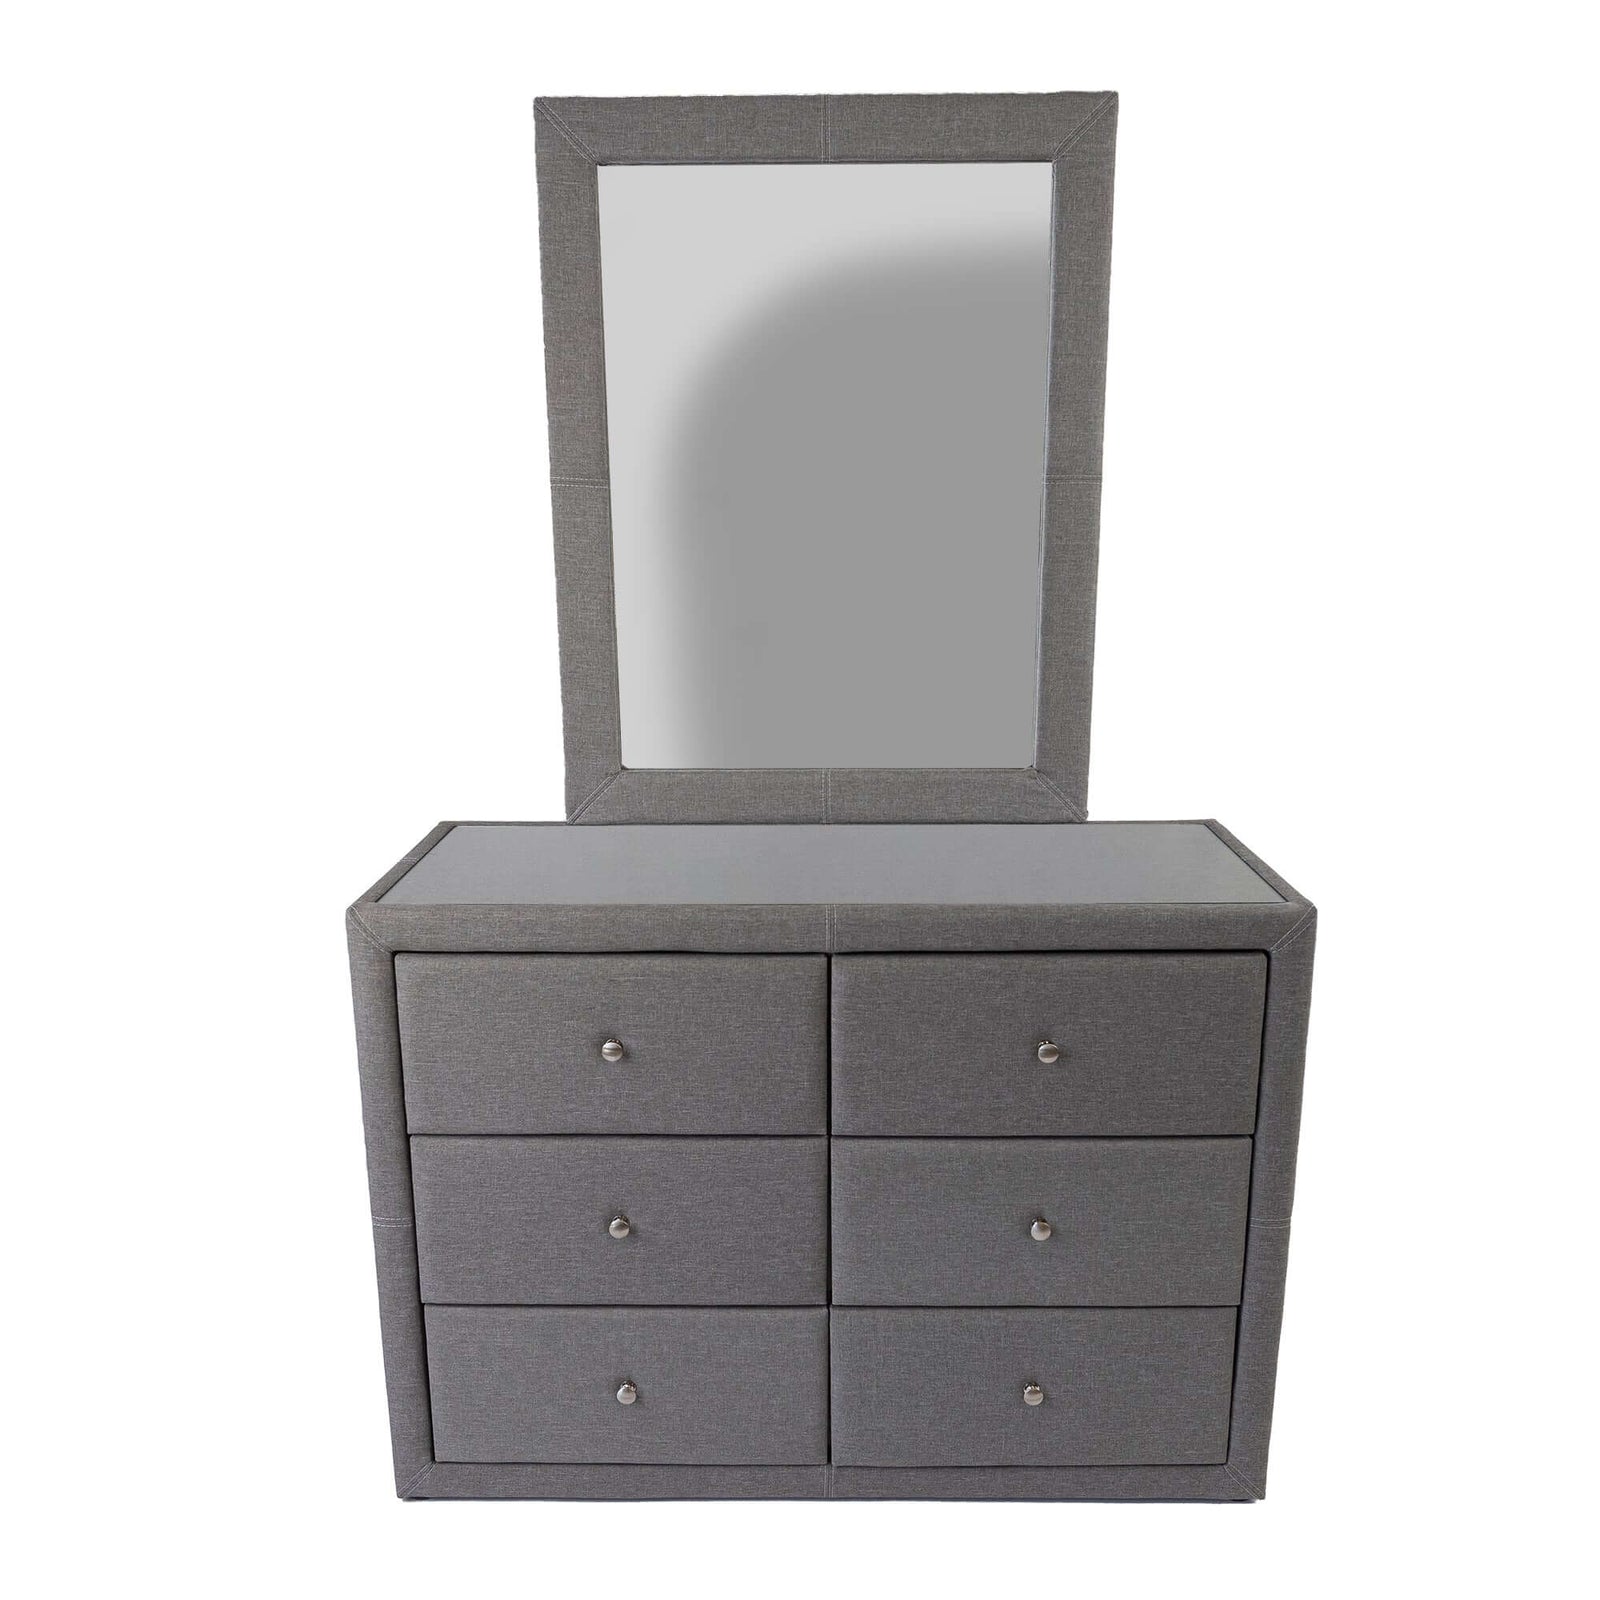 Molly Dresser Mirror 6 Chest of Drawers Bedroom Storage Cabinet - Light Grey-Upinteriors